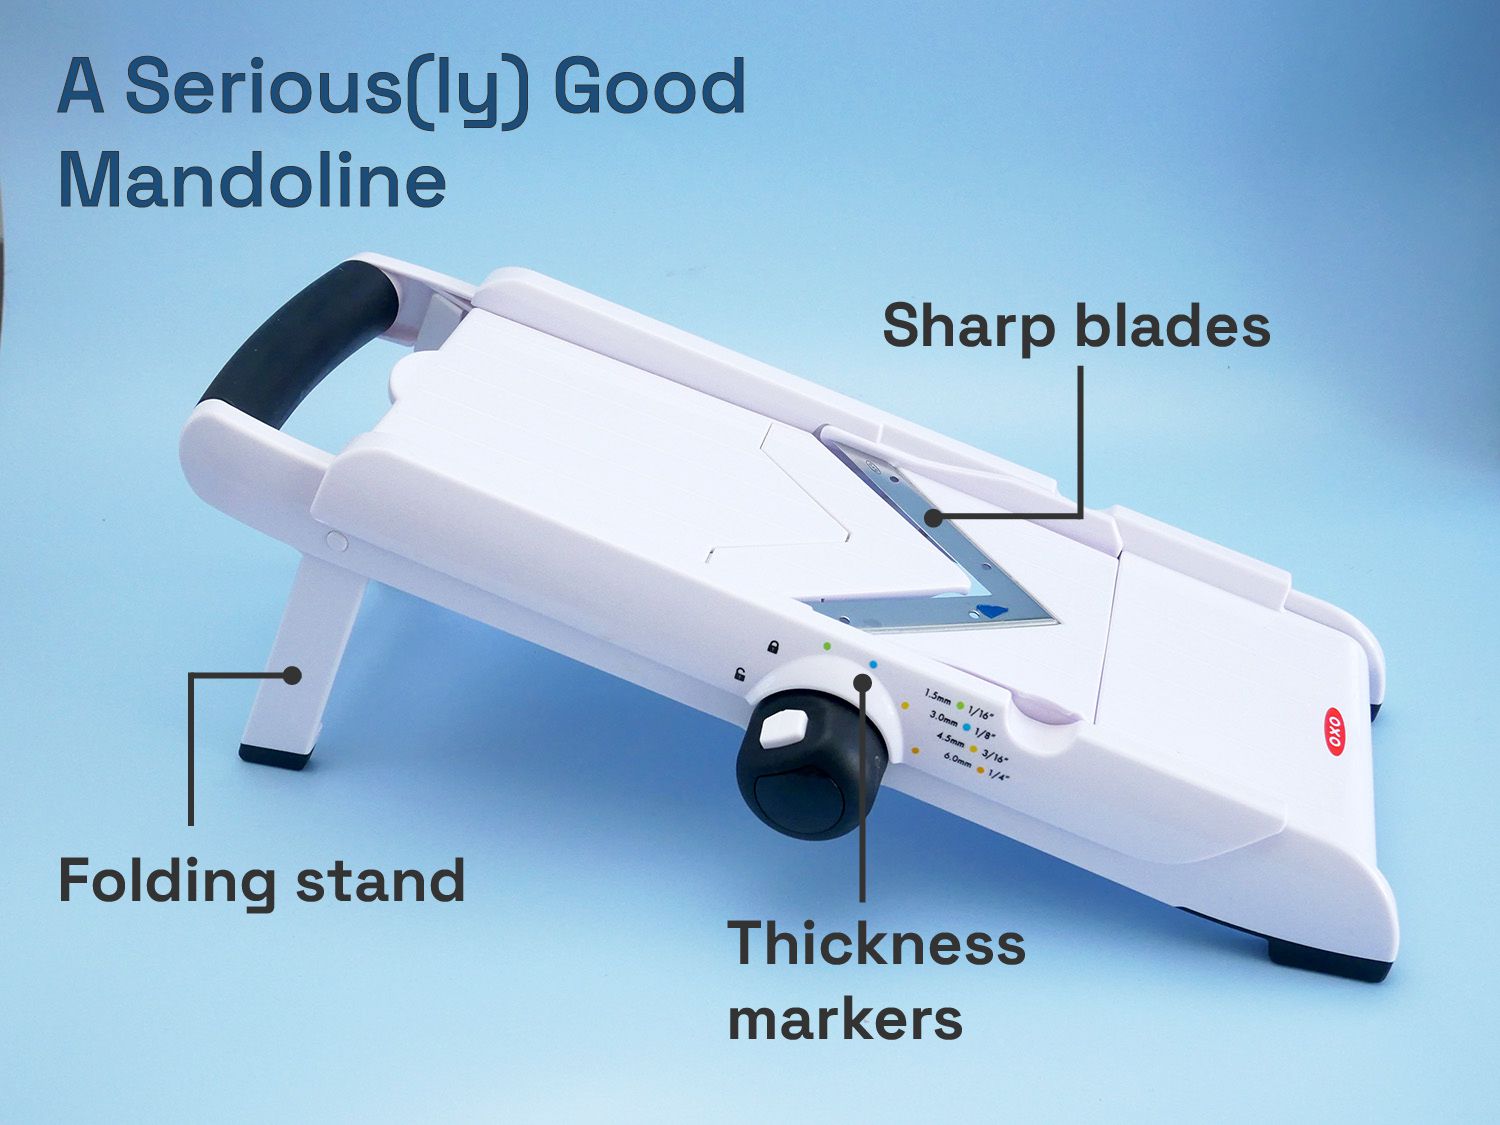 A Seriously good mandoline: sharp blades, folding stands, thickness markers